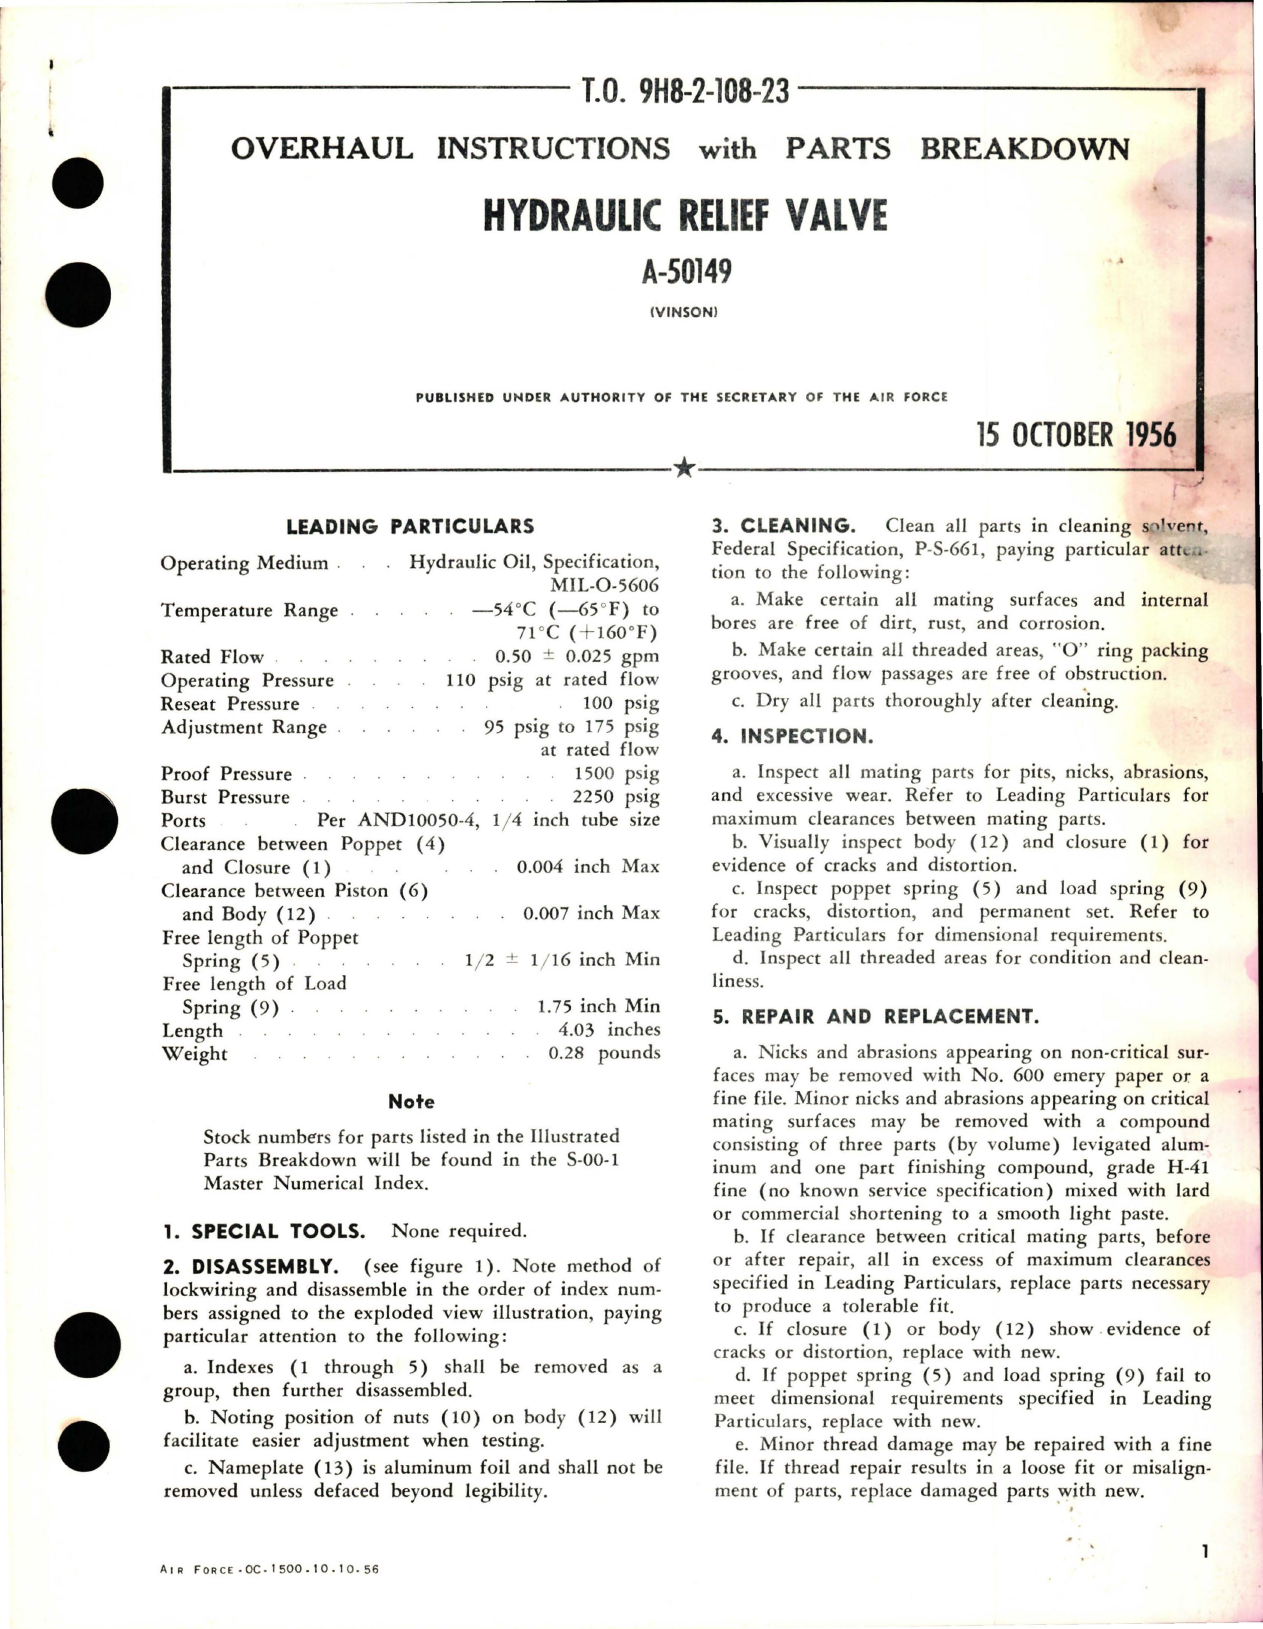 Sample page 1 from AirCorps Library document: Overhaul Instructions with Parts Breakdown for Hydraulic Relief Valve - A-50149 